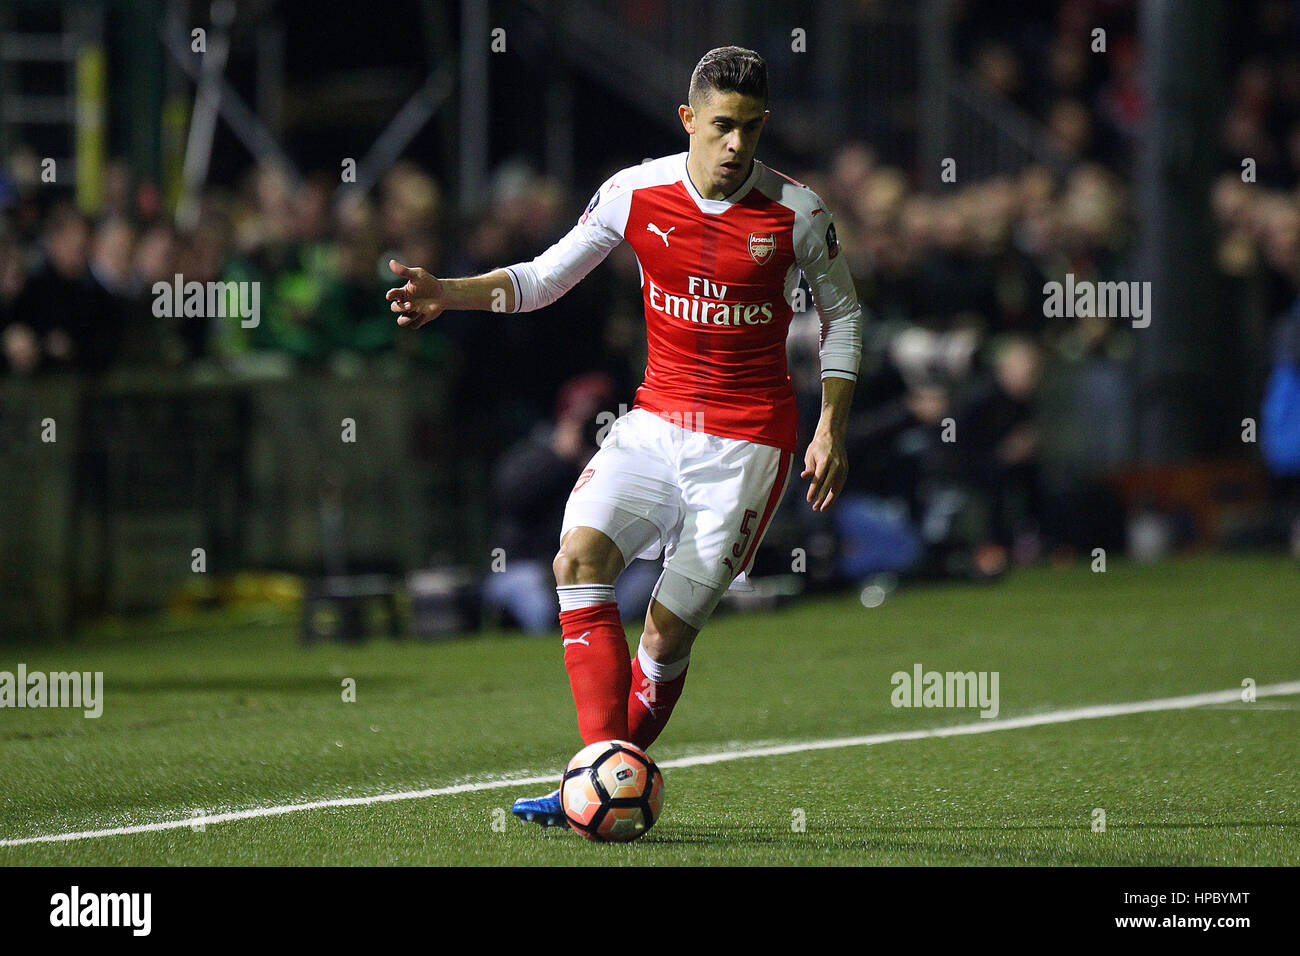 Sutton, UK. 20th Feb, 2017. Gabriel Paulista of Arsenal in action during the FA Cup Fifth Round match between Sutton United and Arsenal at Borough Sports Ground on February 20th 2017 in Sutton, England. Credit: Daniel Chesterton/Alamy Live News Stock Photo